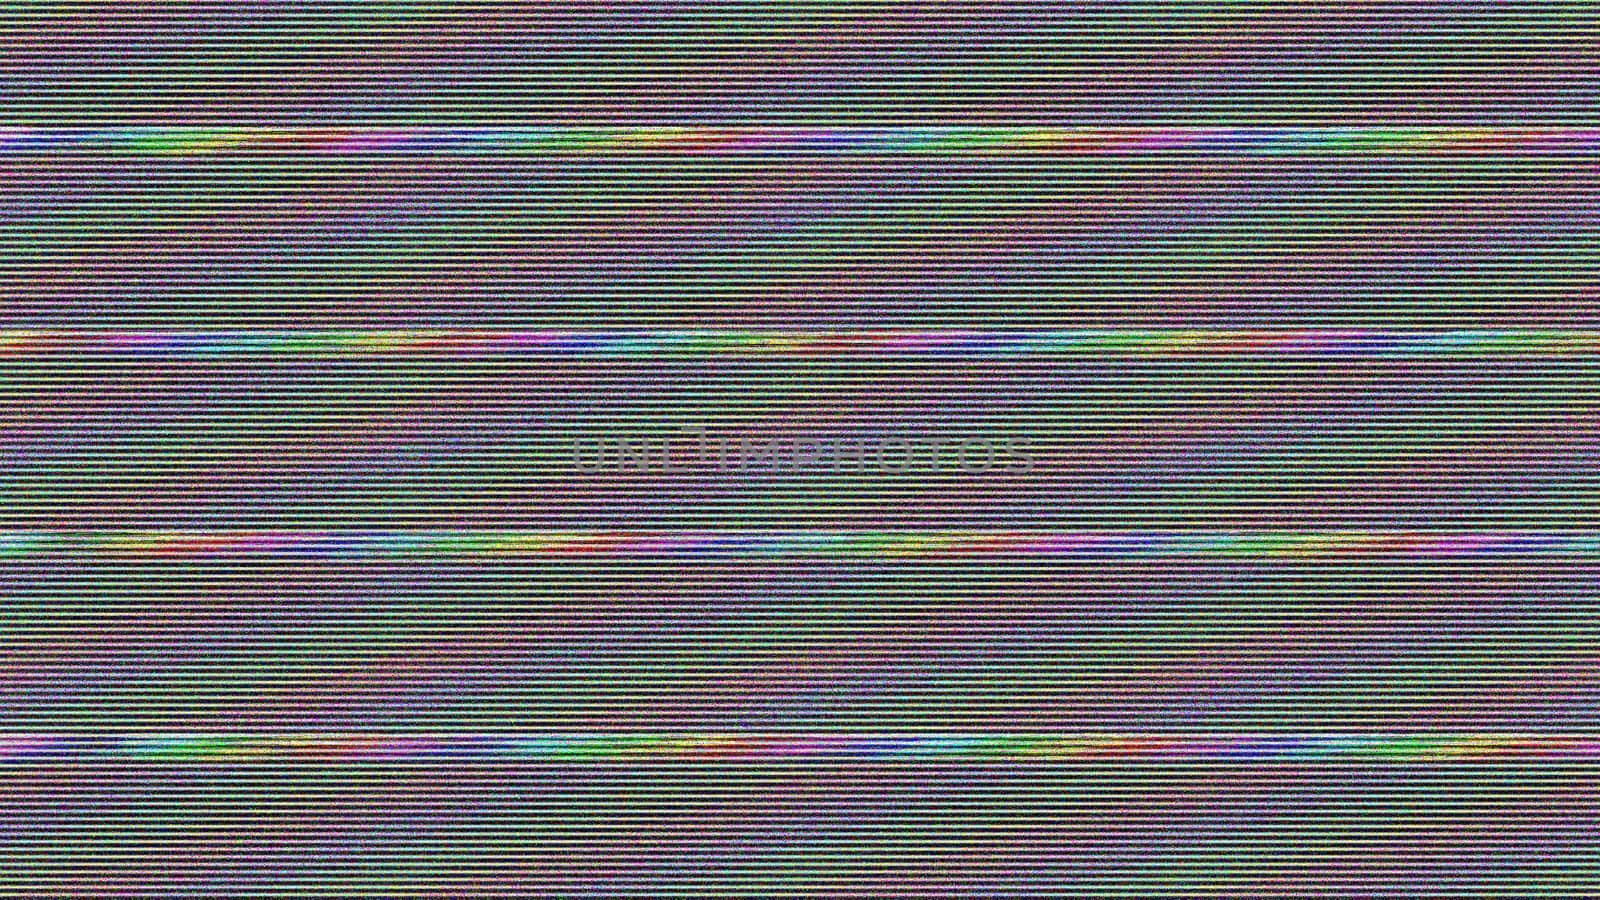 Glitch TV Screen. Abstract background. Digital illustration. 3d rendering